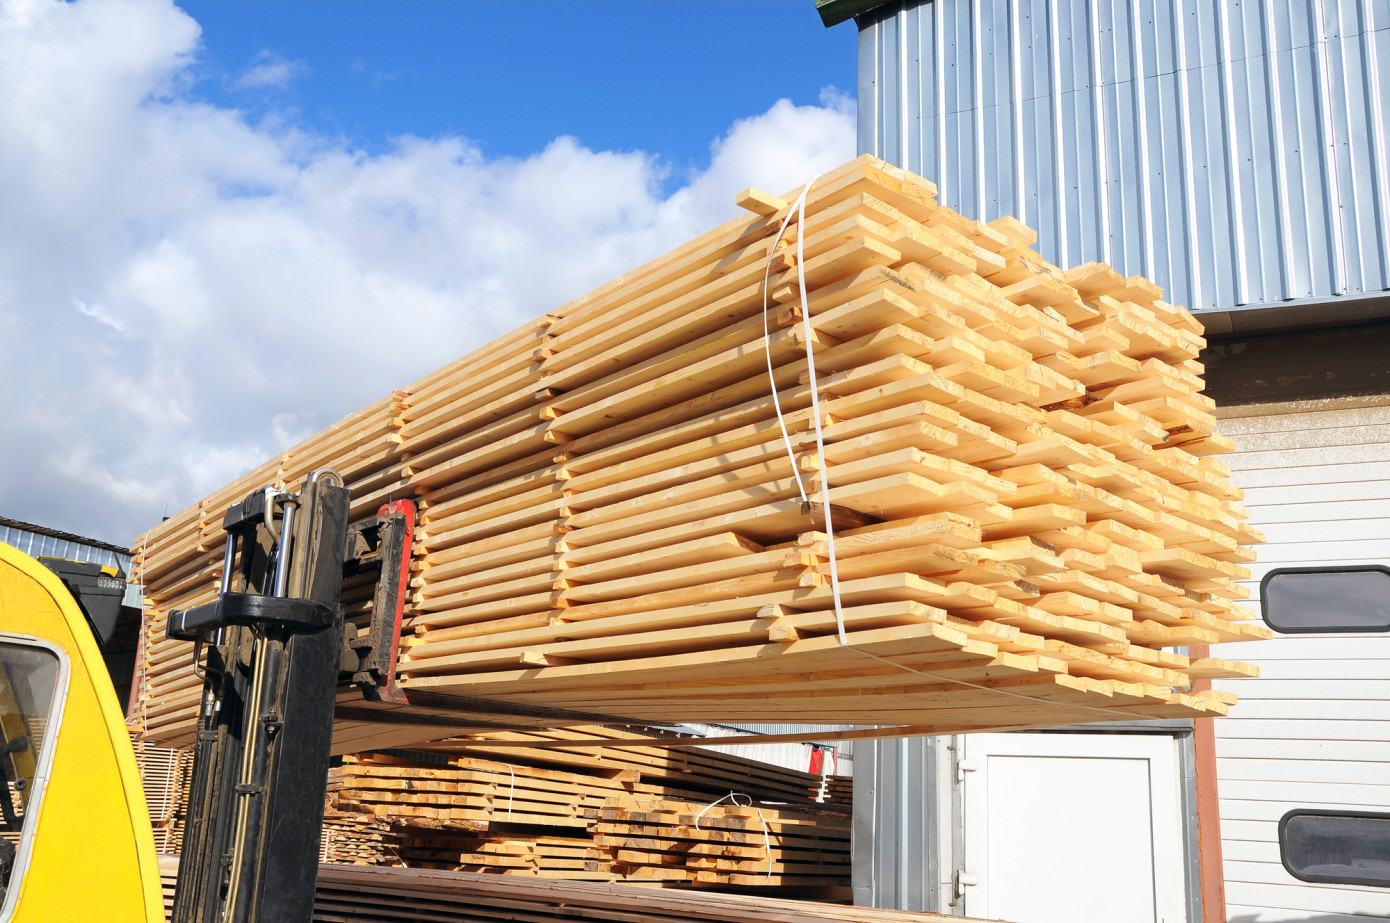 Canadian softwood lumber prices continue downward trend in May